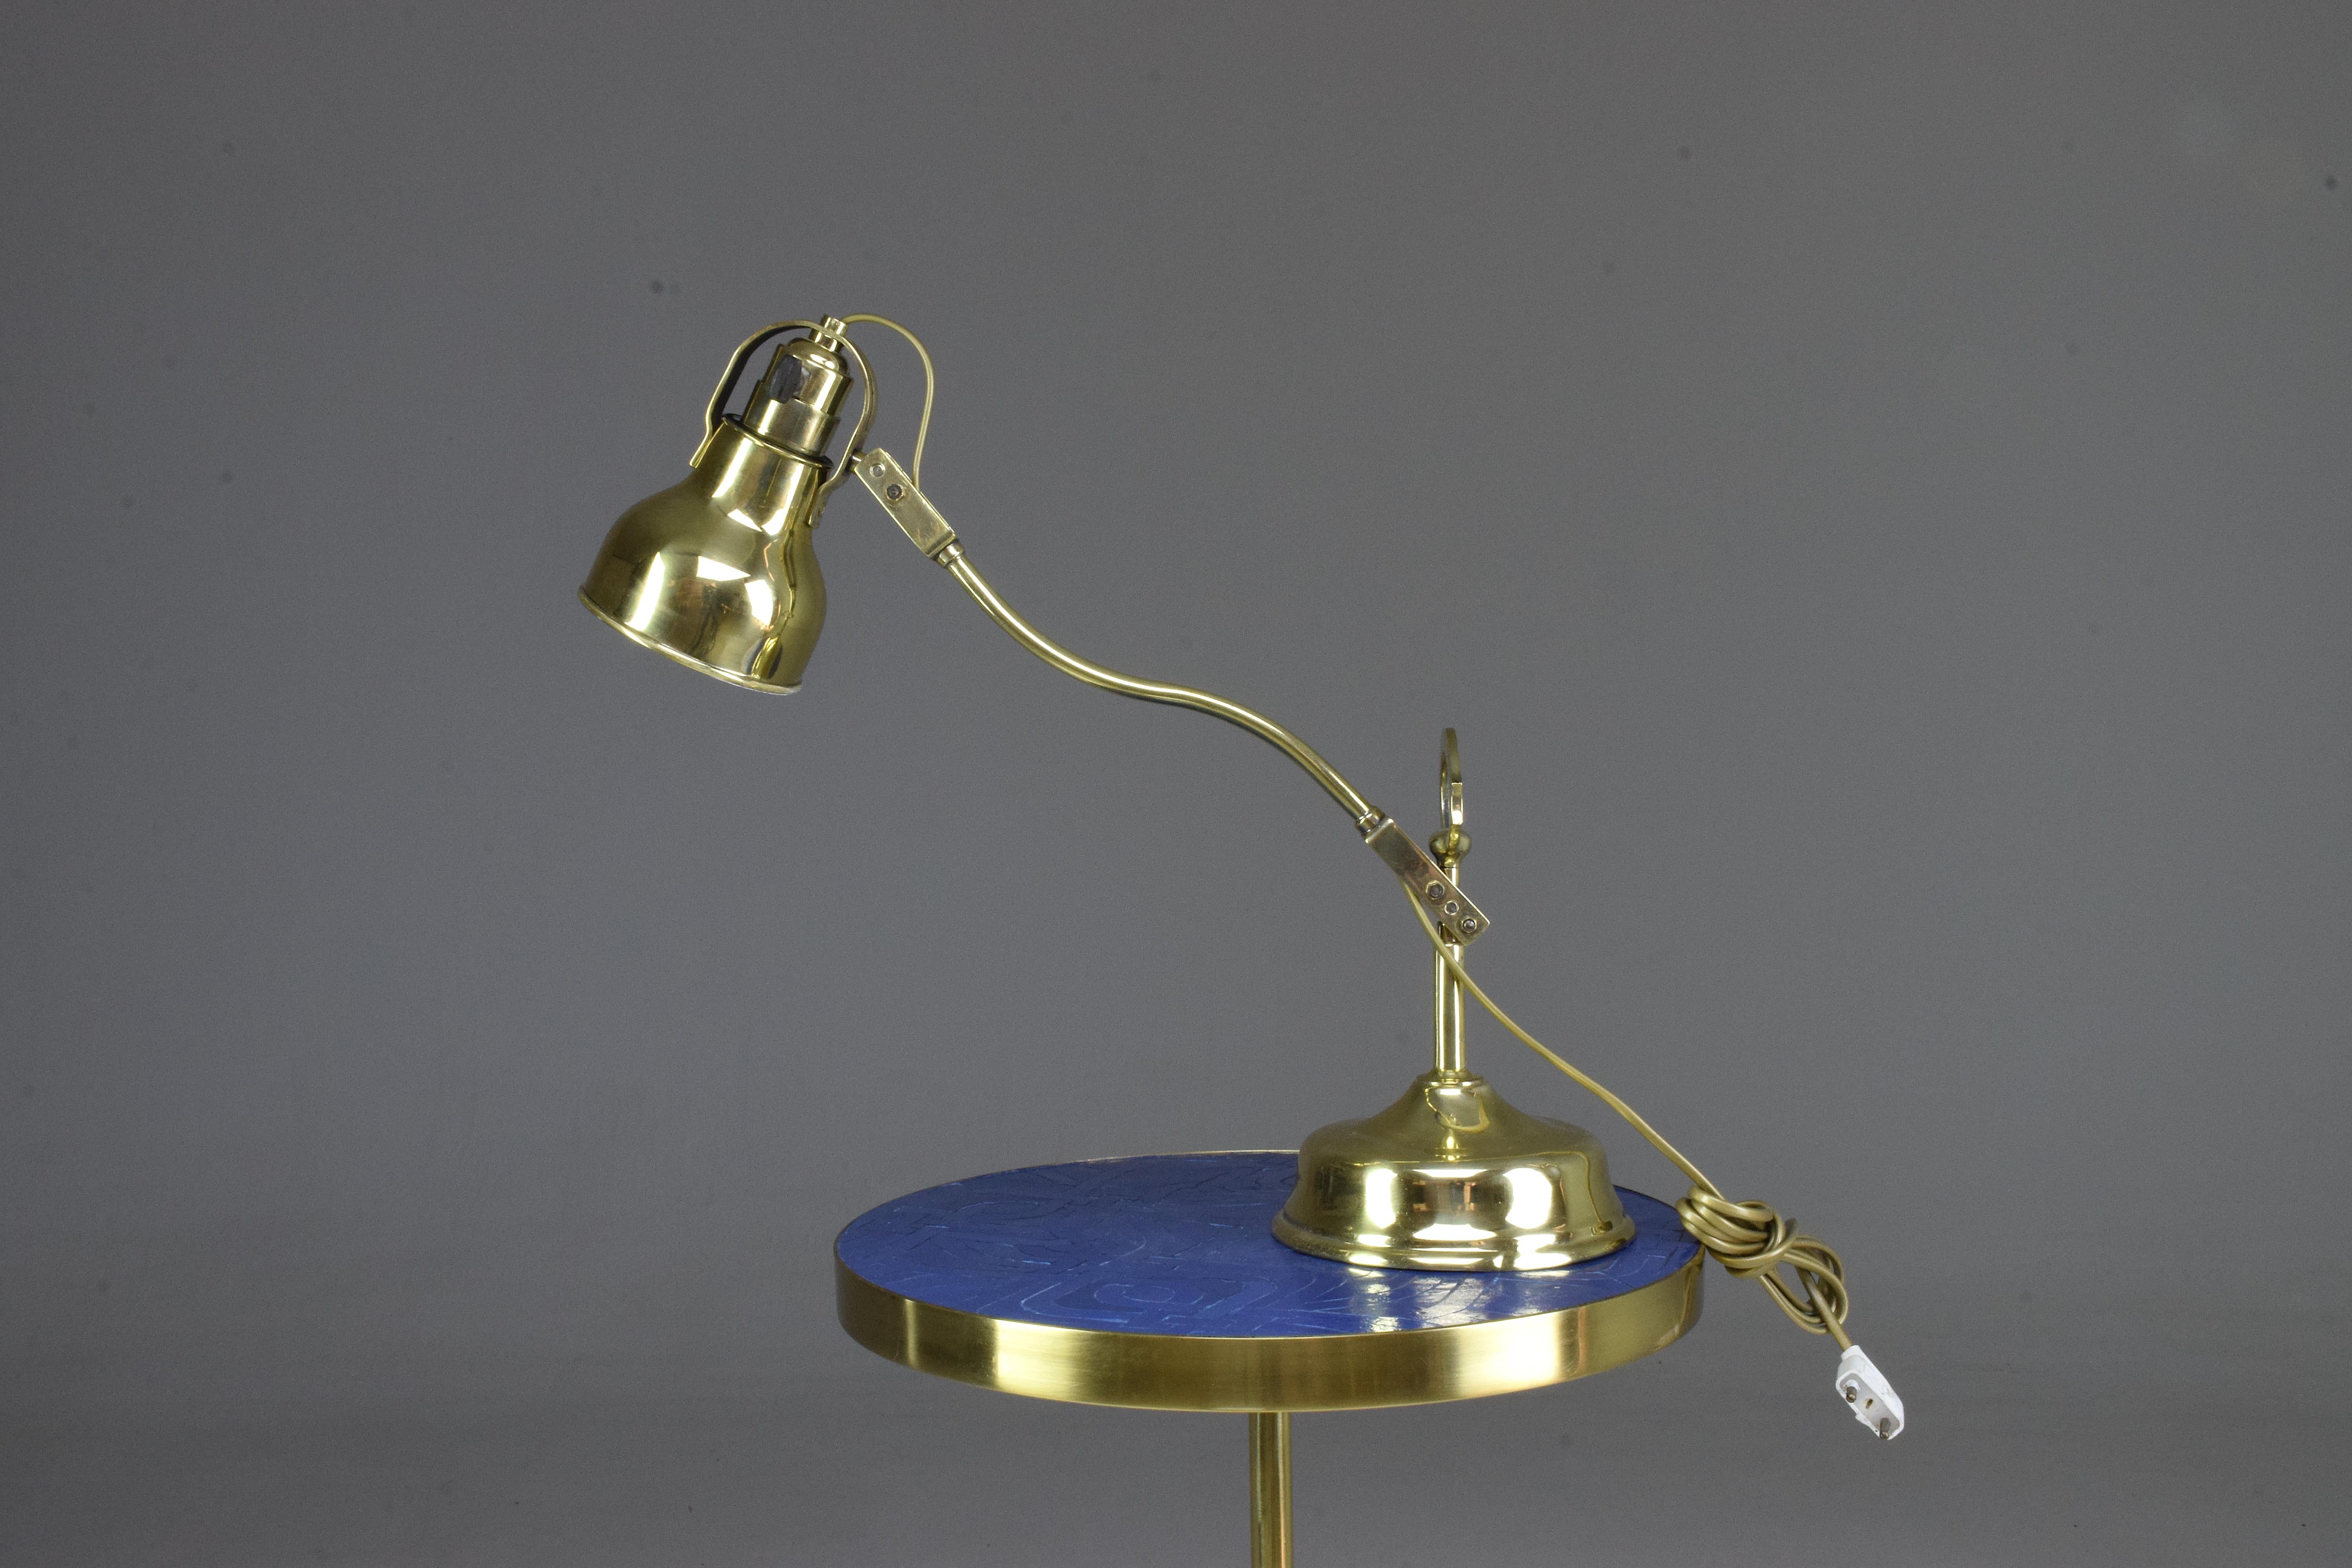 A French table or desk lamp in a solid gold polished brass structure from the 1920s-1930s period with double articulation.
In a fully restored condition with new wiring.
Exquisite design.
All our pieces are fully restored at our atelier and we only